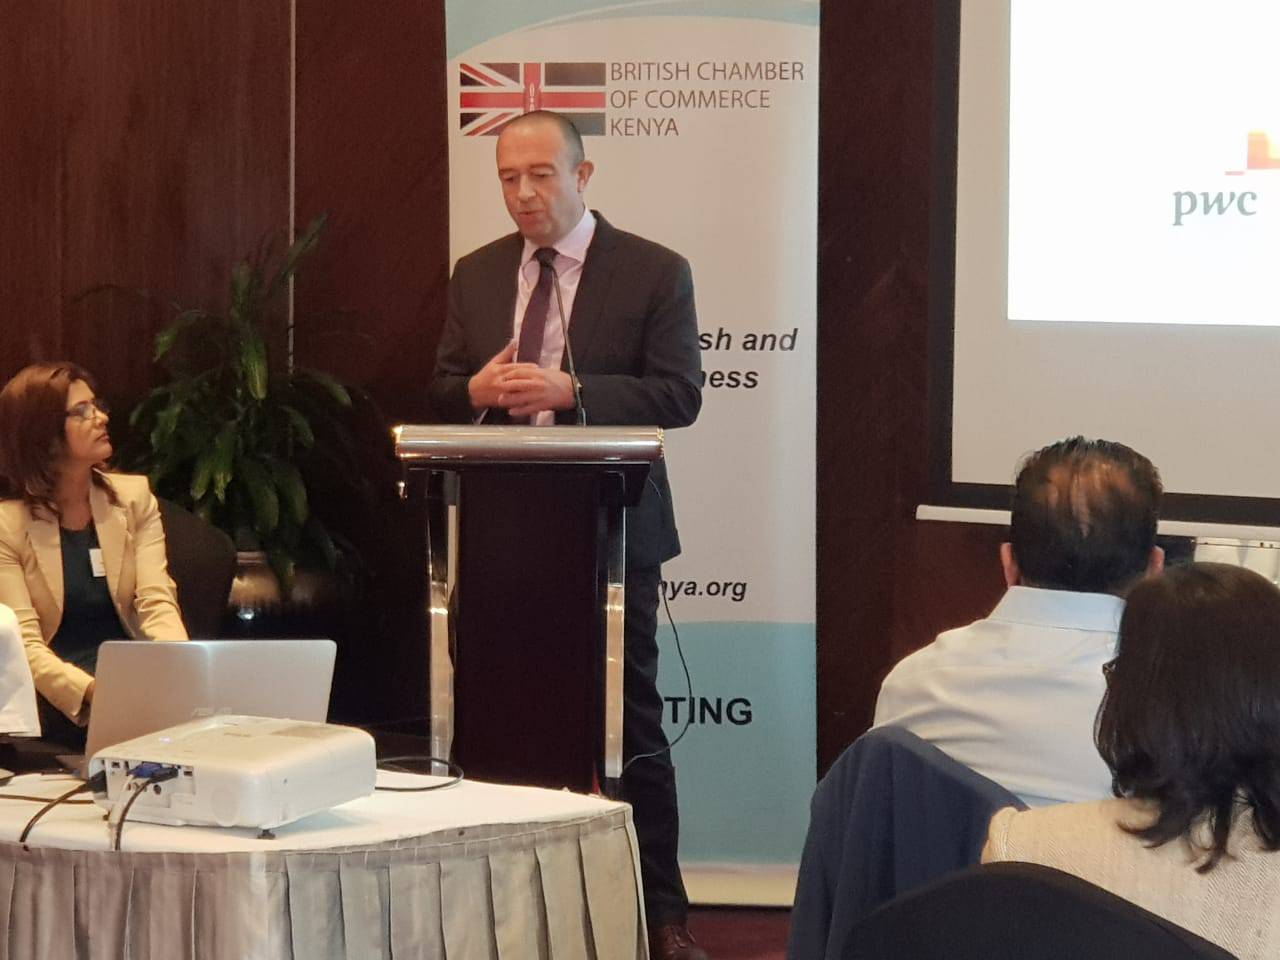 BCCK, PwC, UK Visa Process and Faraja Cancer support Networking Breakfast – 11th July 2019 19